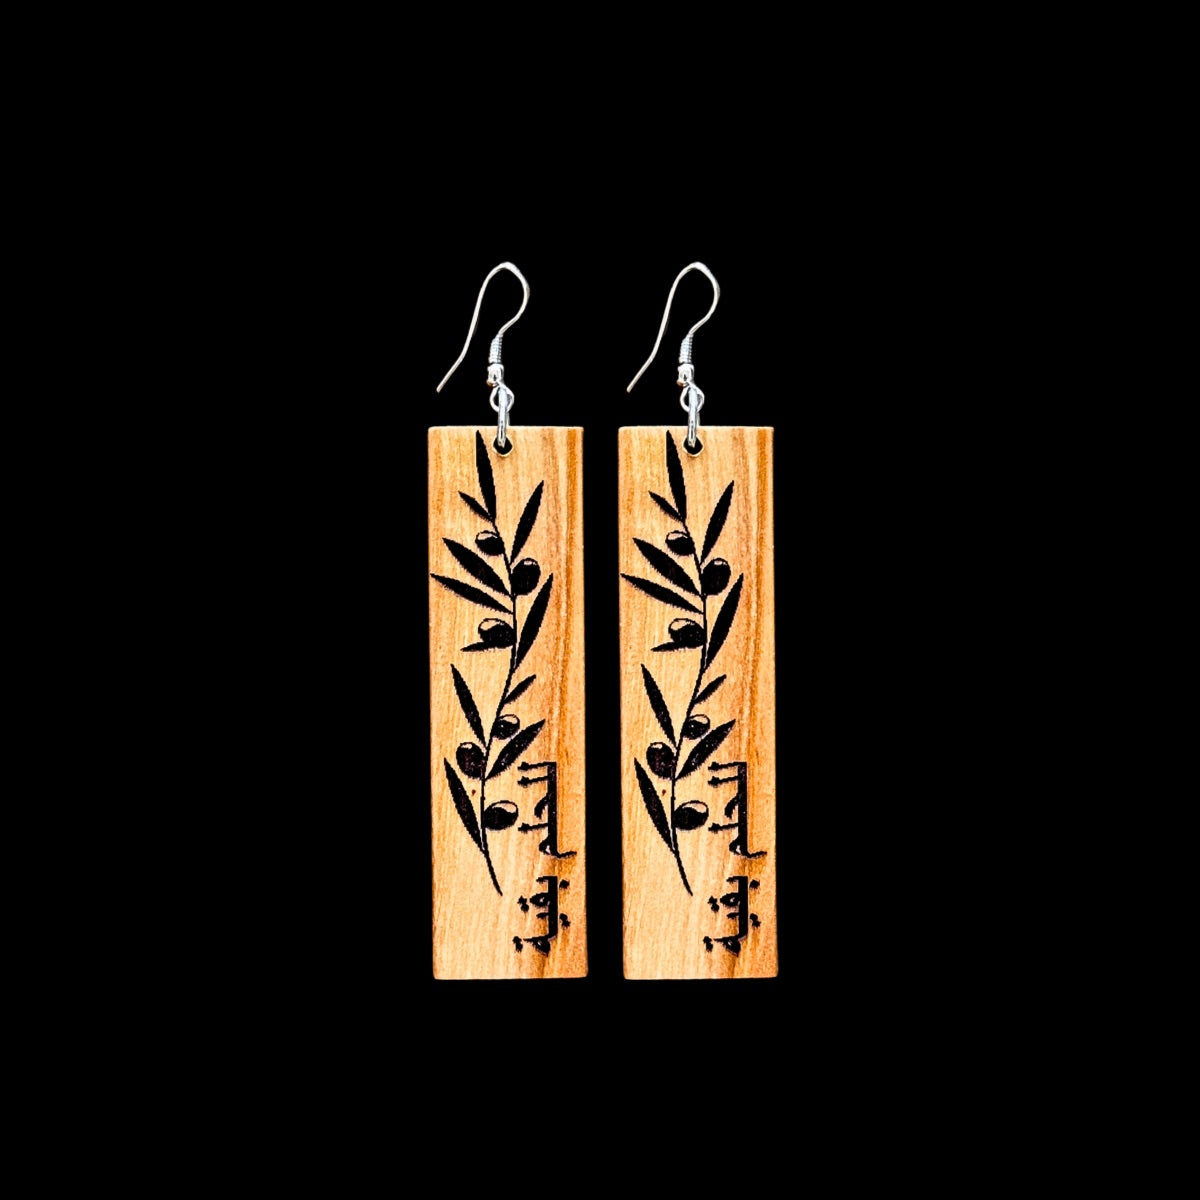 Olivewood Earrings: "the dream continues"